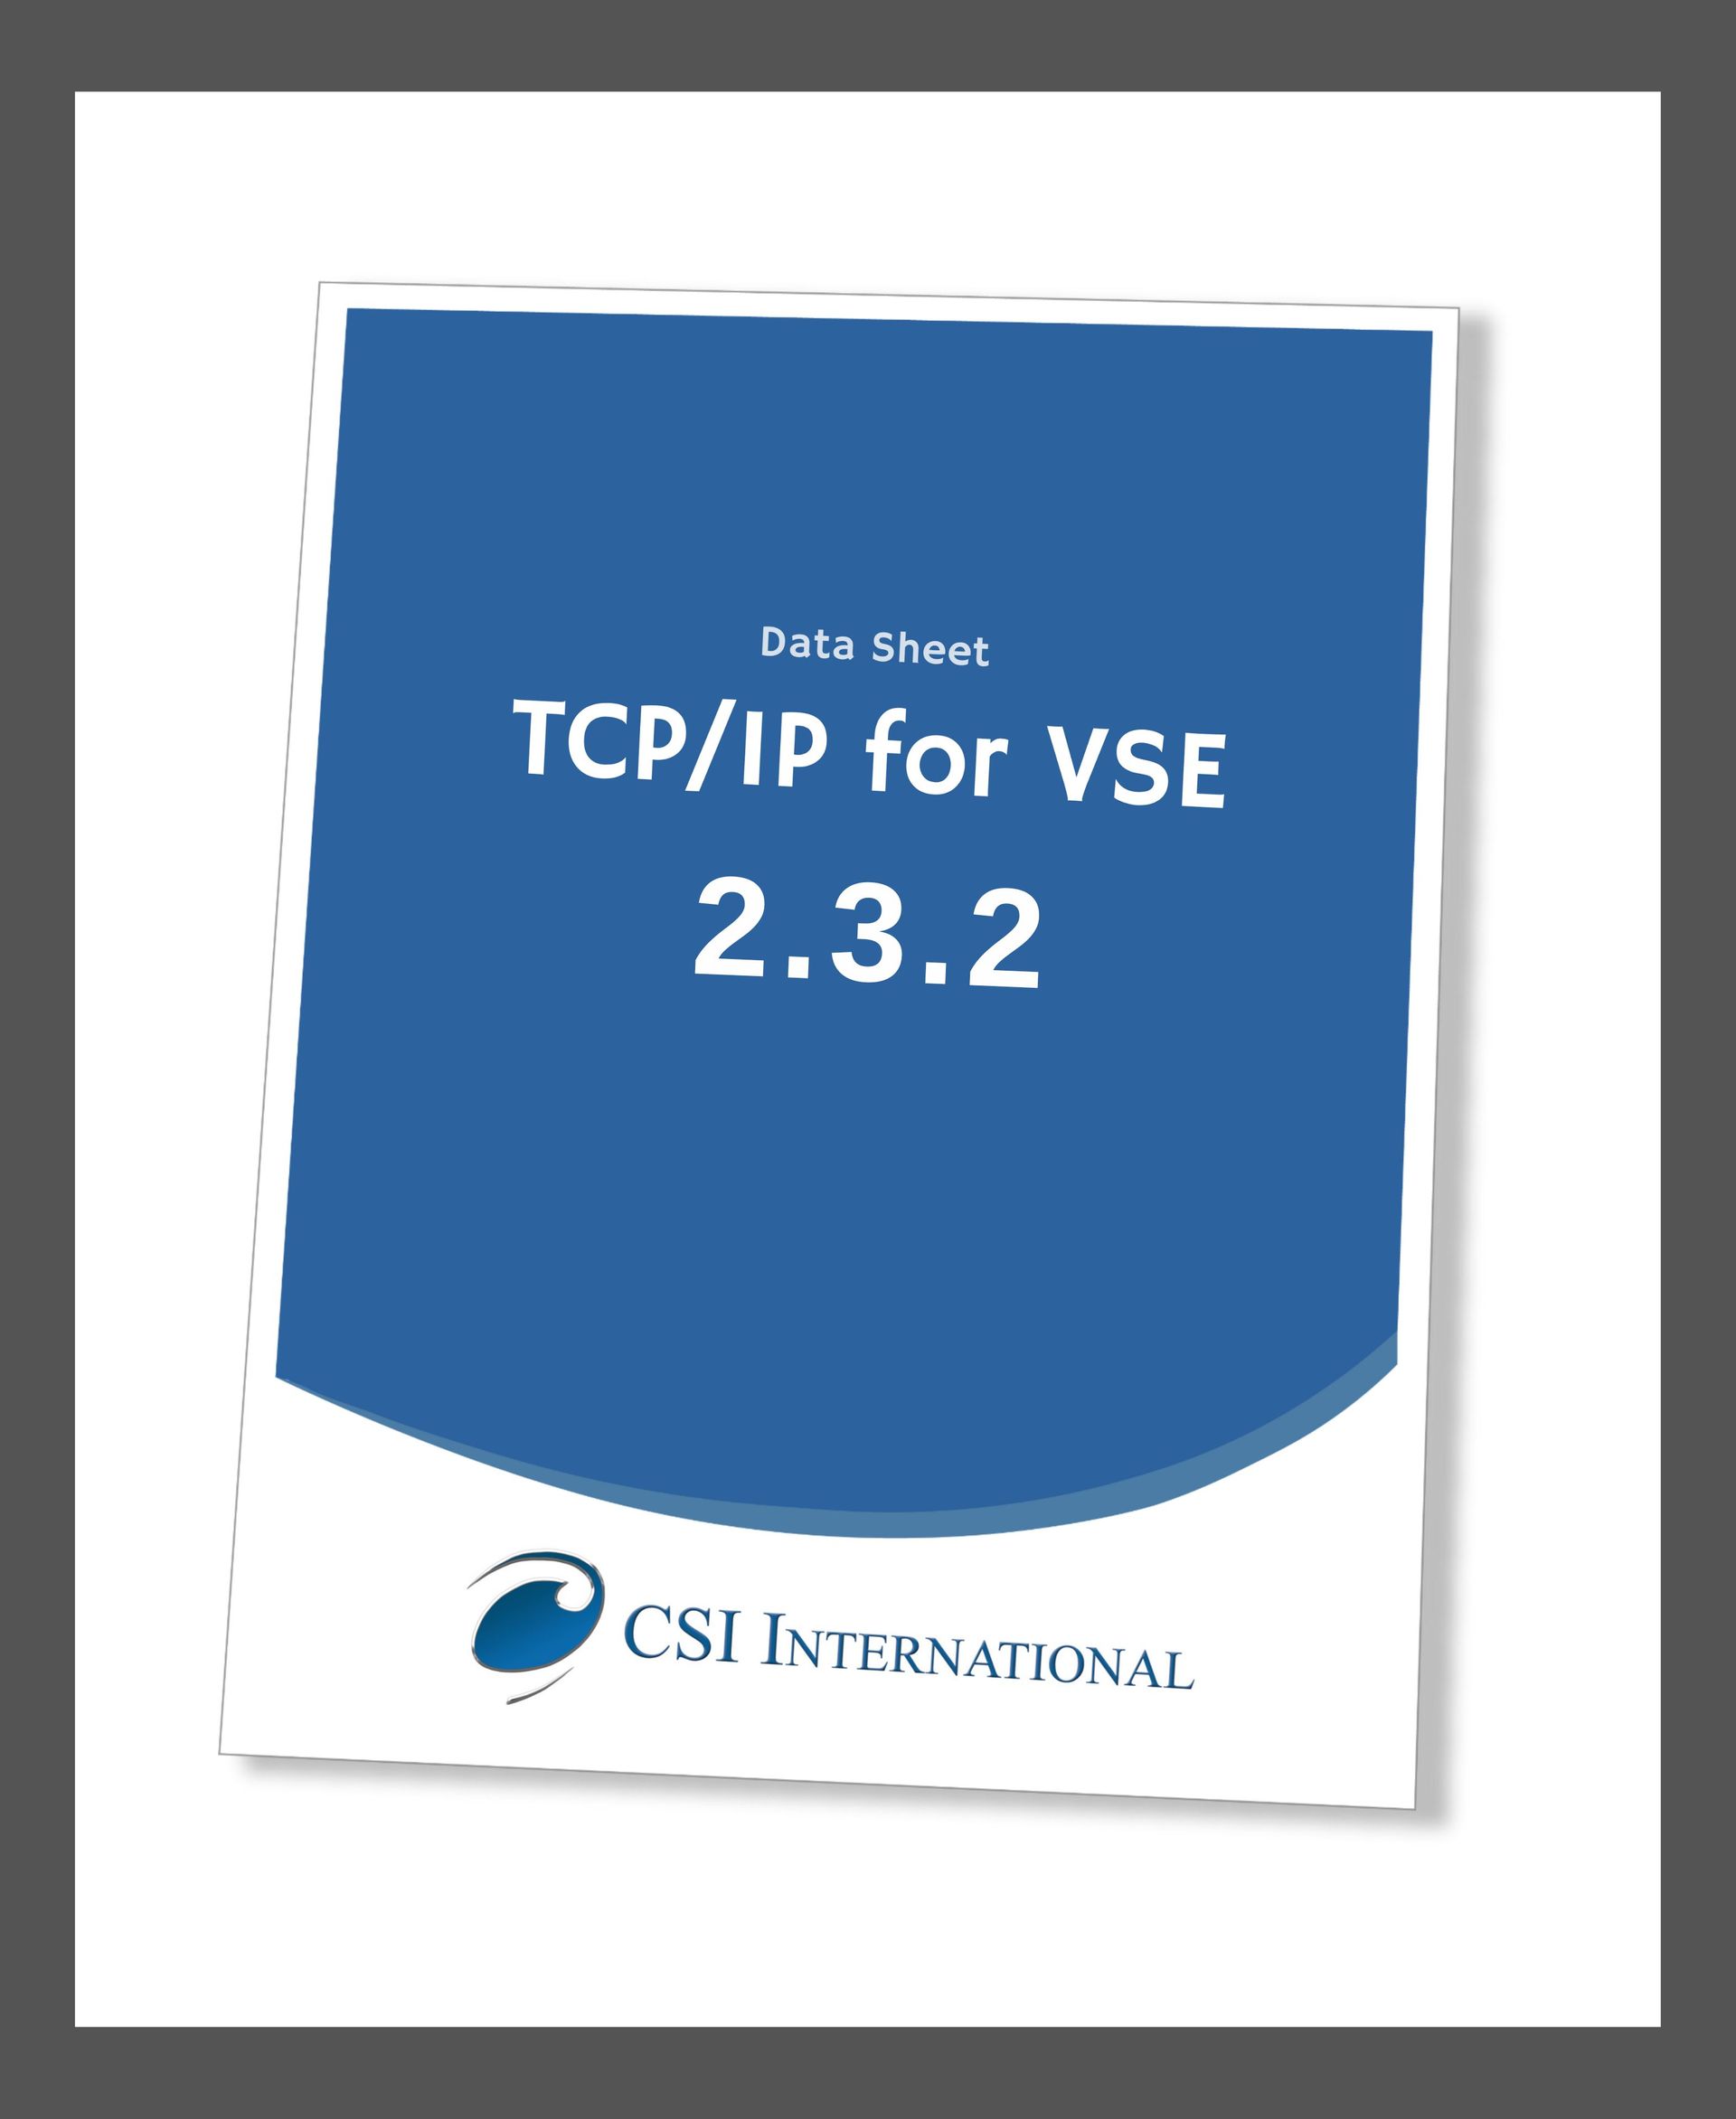 Data Sheet icon image for TCP/IP for VSE 2.3.2